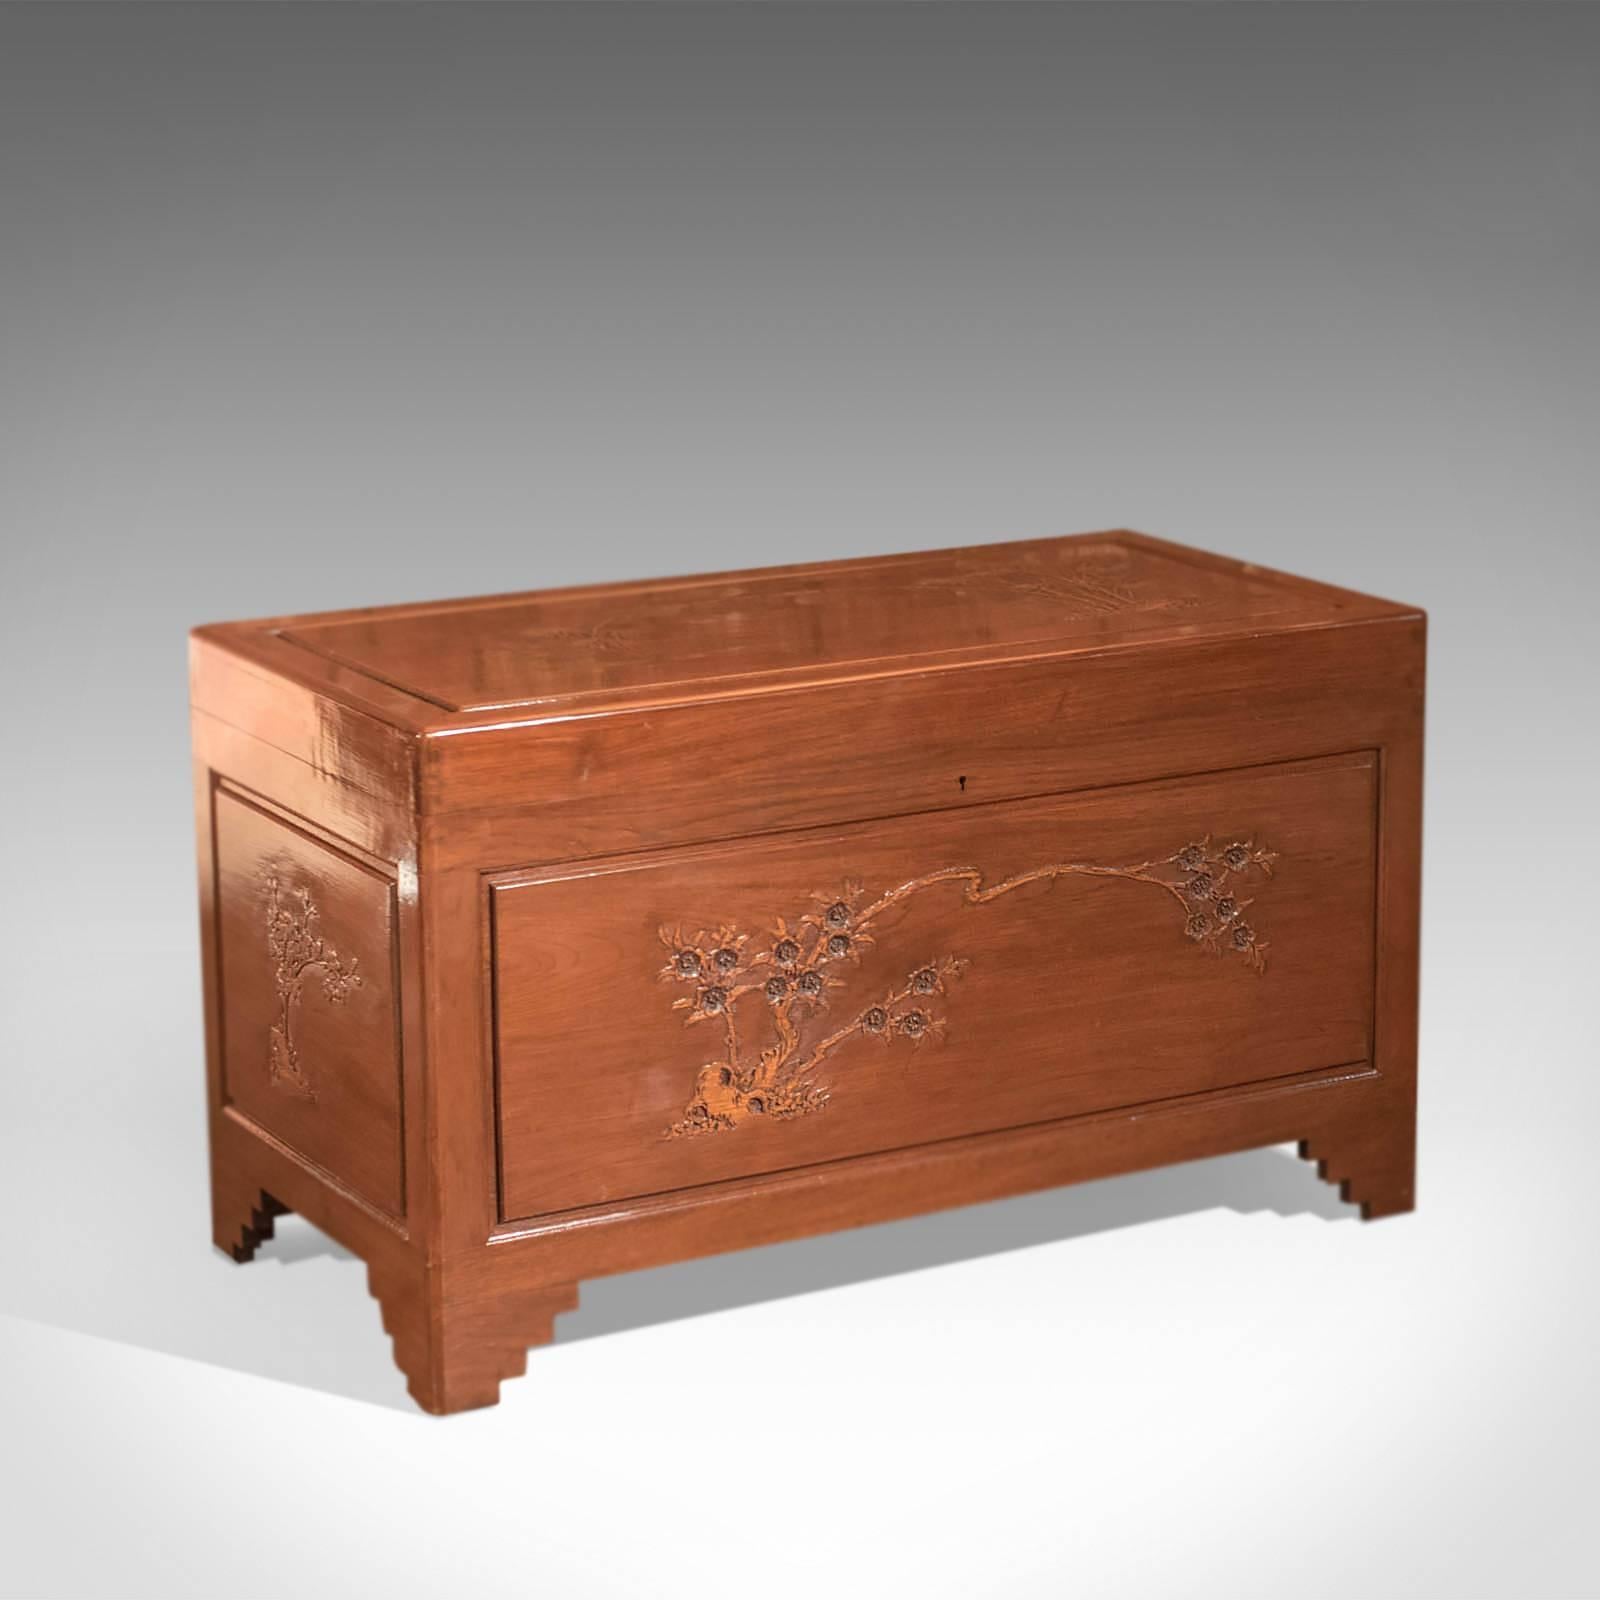 This is a Mid-Century camphor wood chest.

Highly polished, this chest is raised on stepped bracket feet, typically found on oriental storage furniture of this type.

Each face of the trunk features a field panel decorated with modest relief